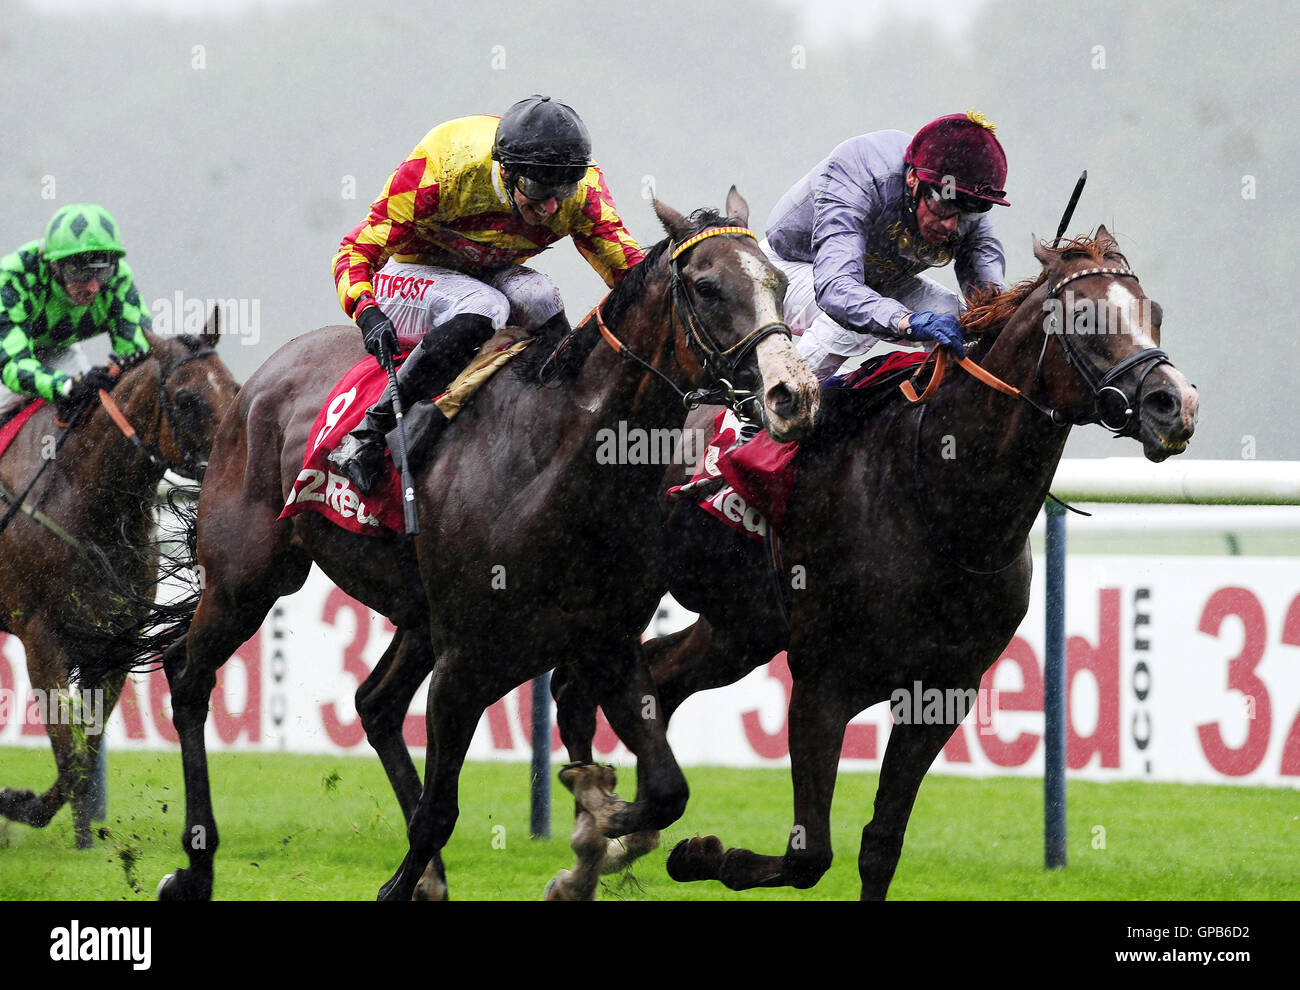 Hathal ridden by Frankie Dettori (right) beats Mitchum Swagger ridden by George Baker to win the 32 Red Mile race at Haydock Racecouse. Stock Photo